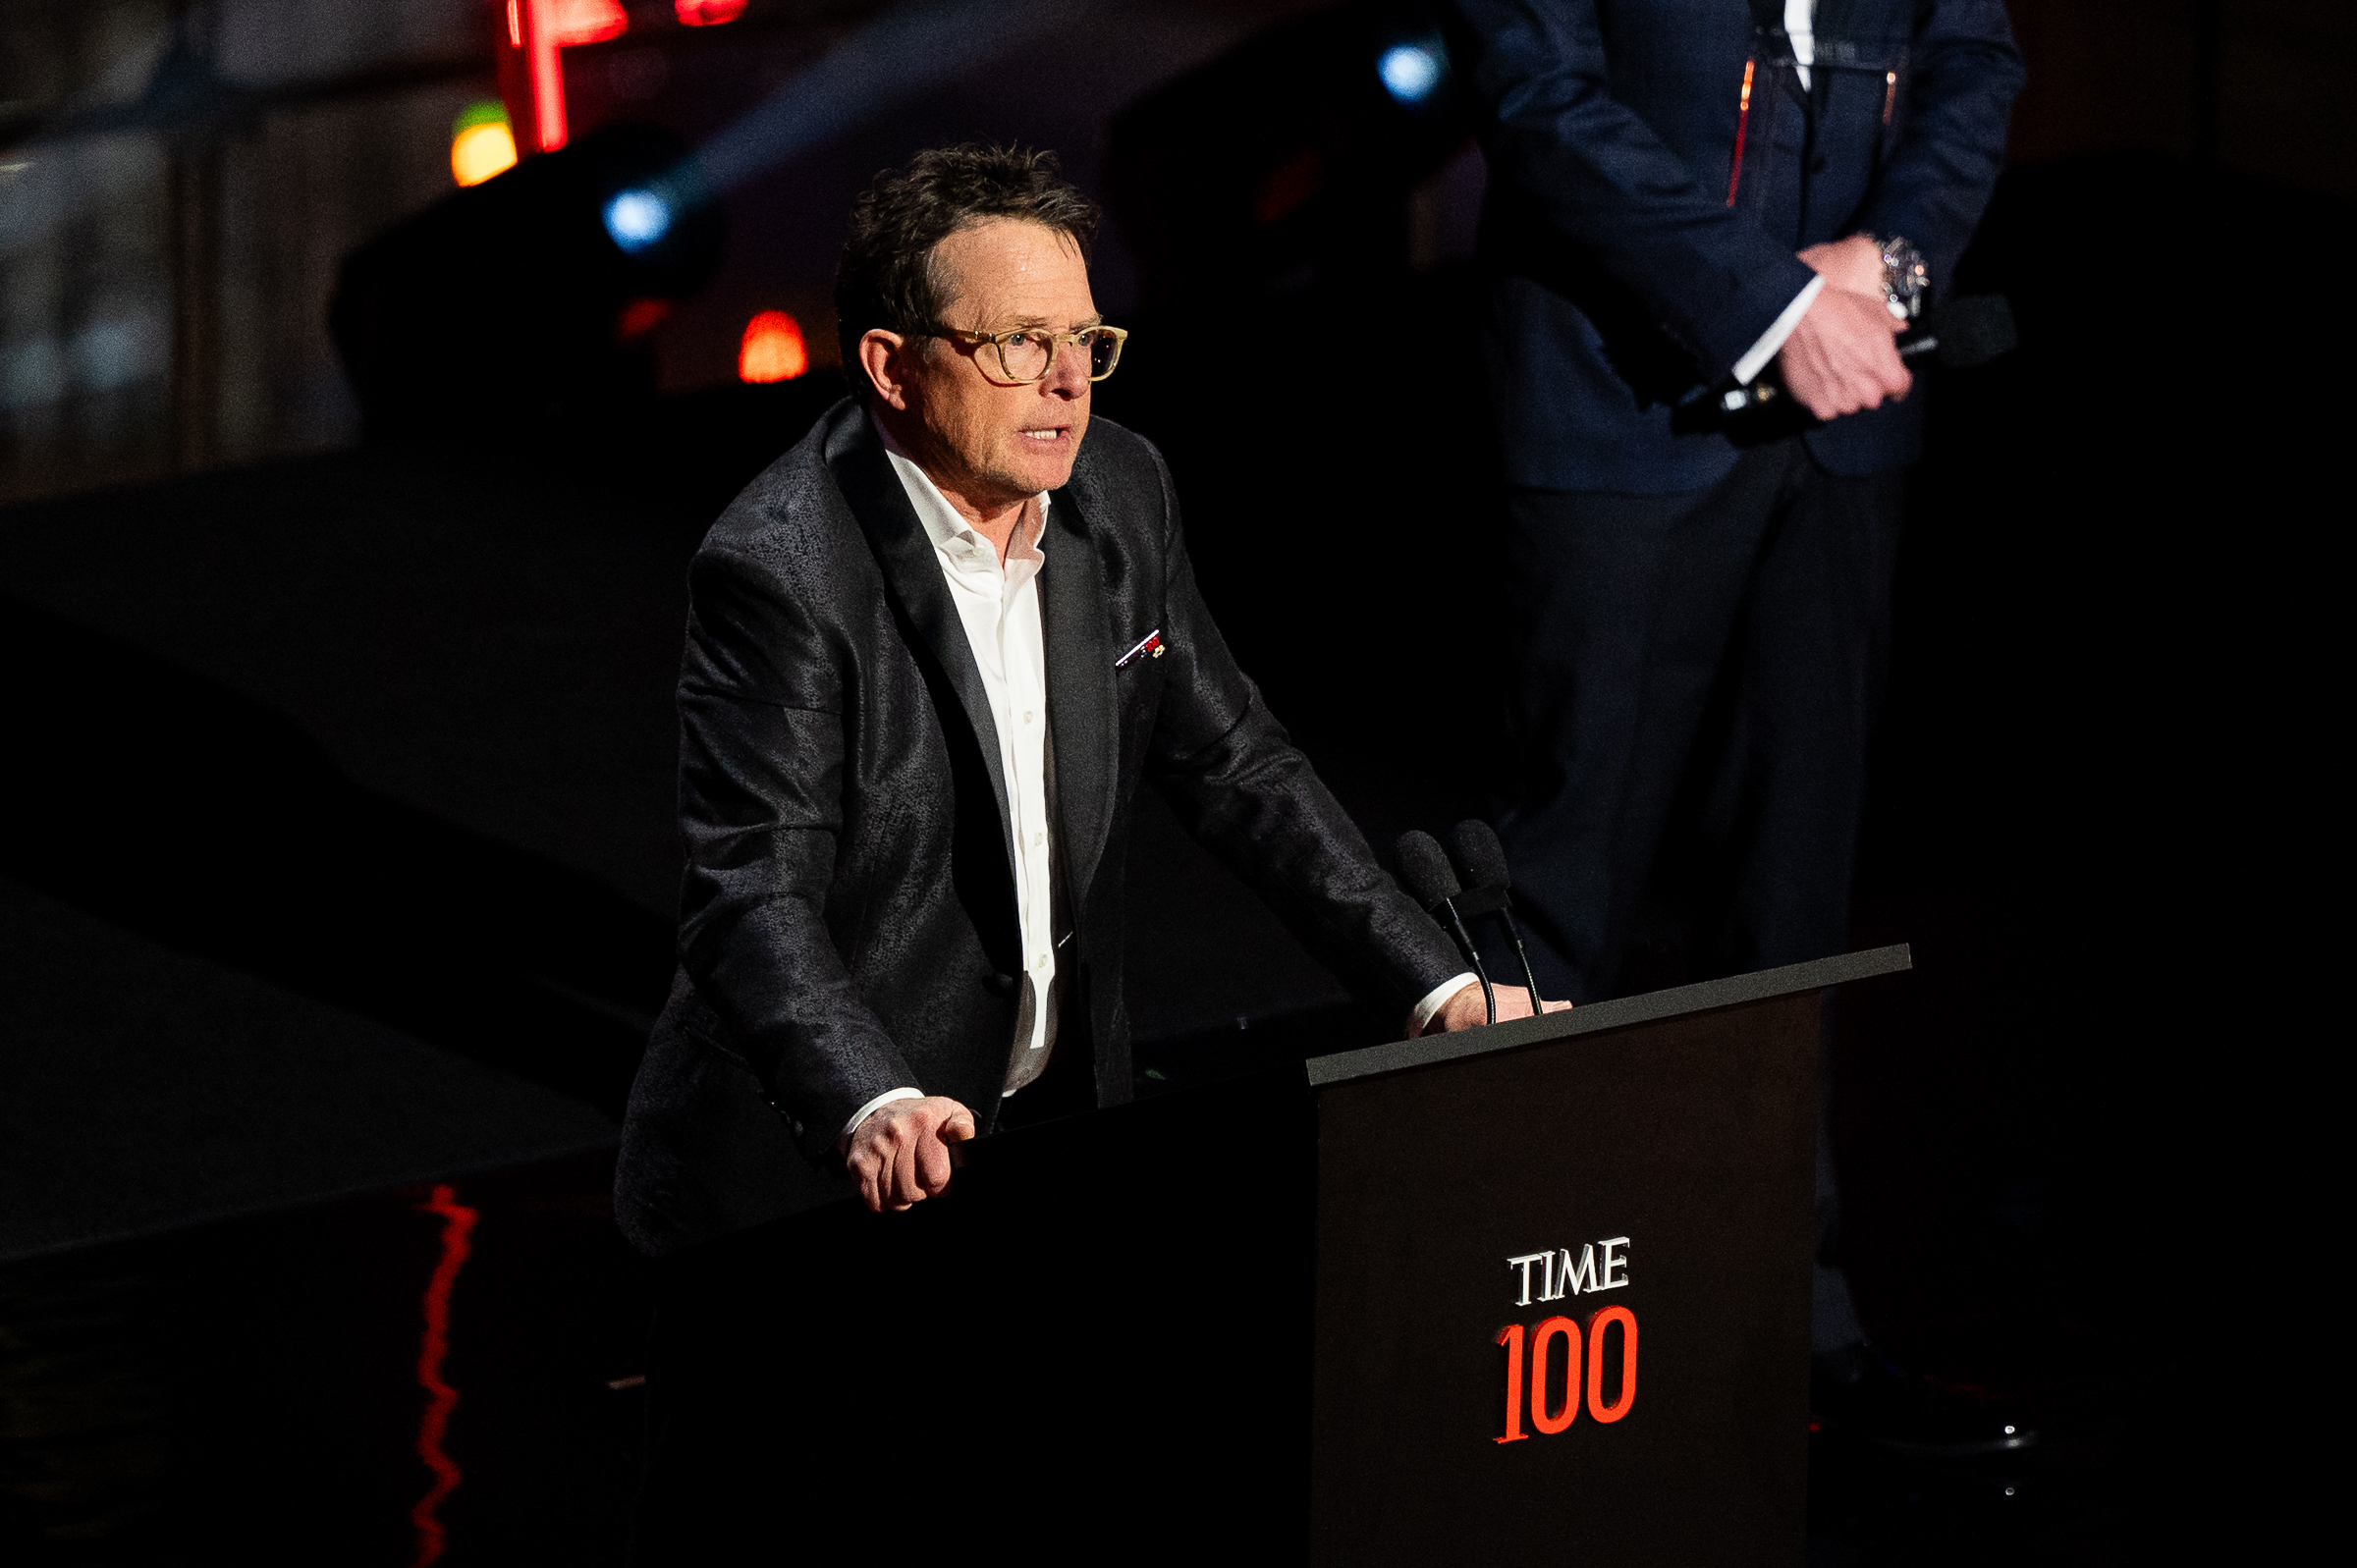 Michael J. Fox speaks at the TIME 100 Gala